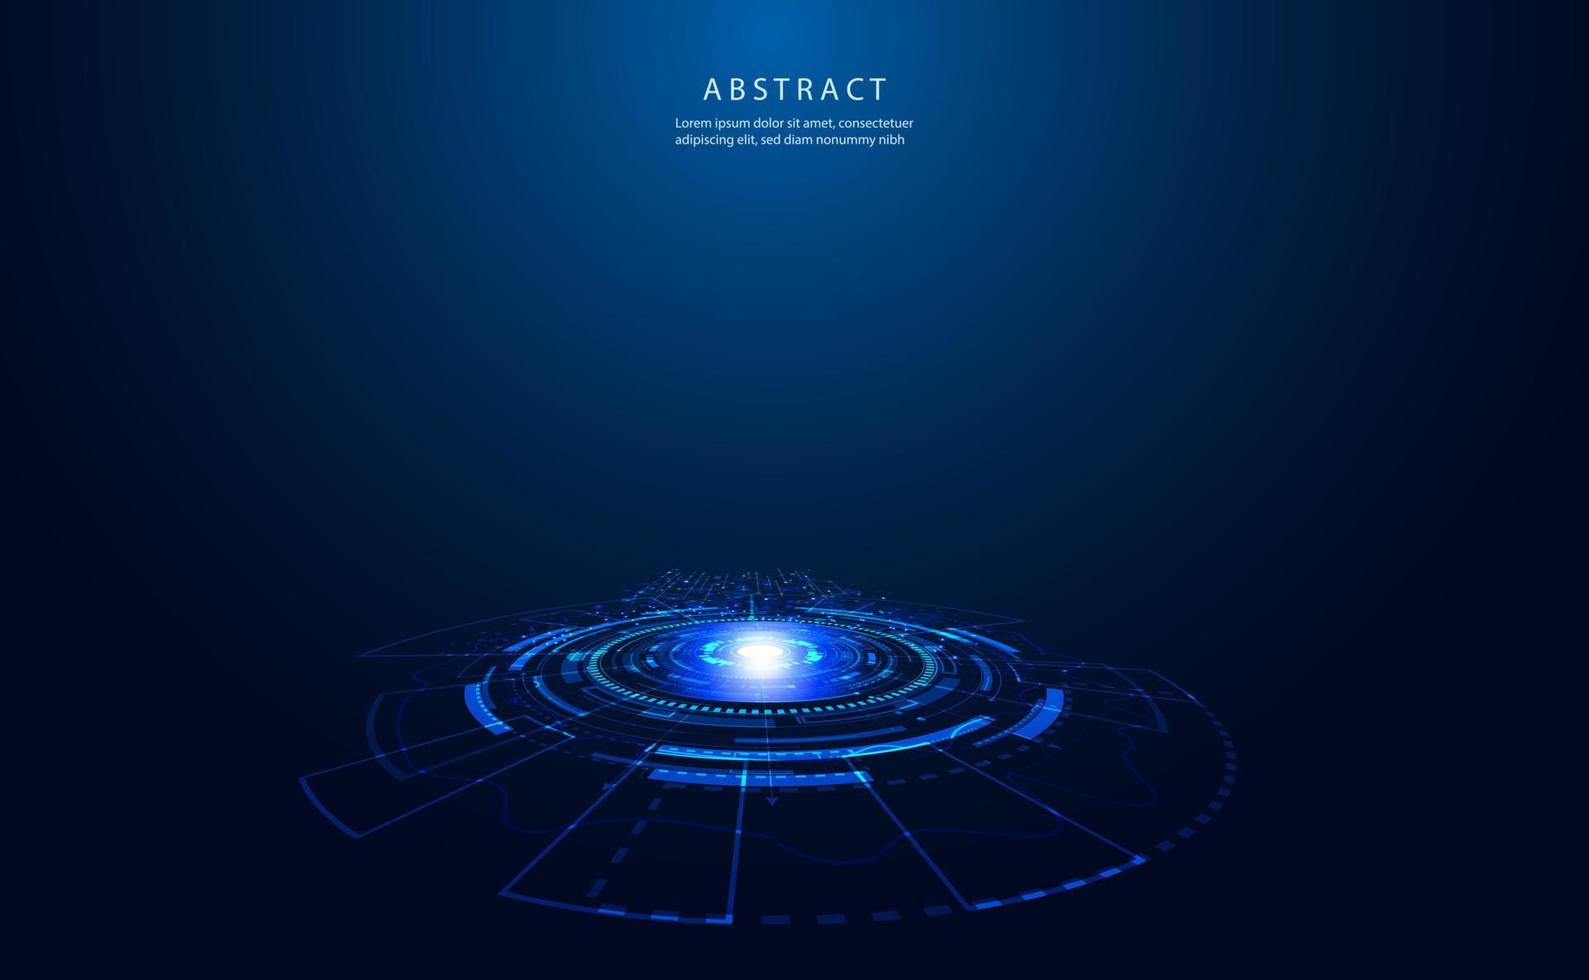 Abstract Circle Digital Circuit Concept Light Circle Network Blue Digital Copy Space for Text Wallpaper Background Futuristic Modern. vector